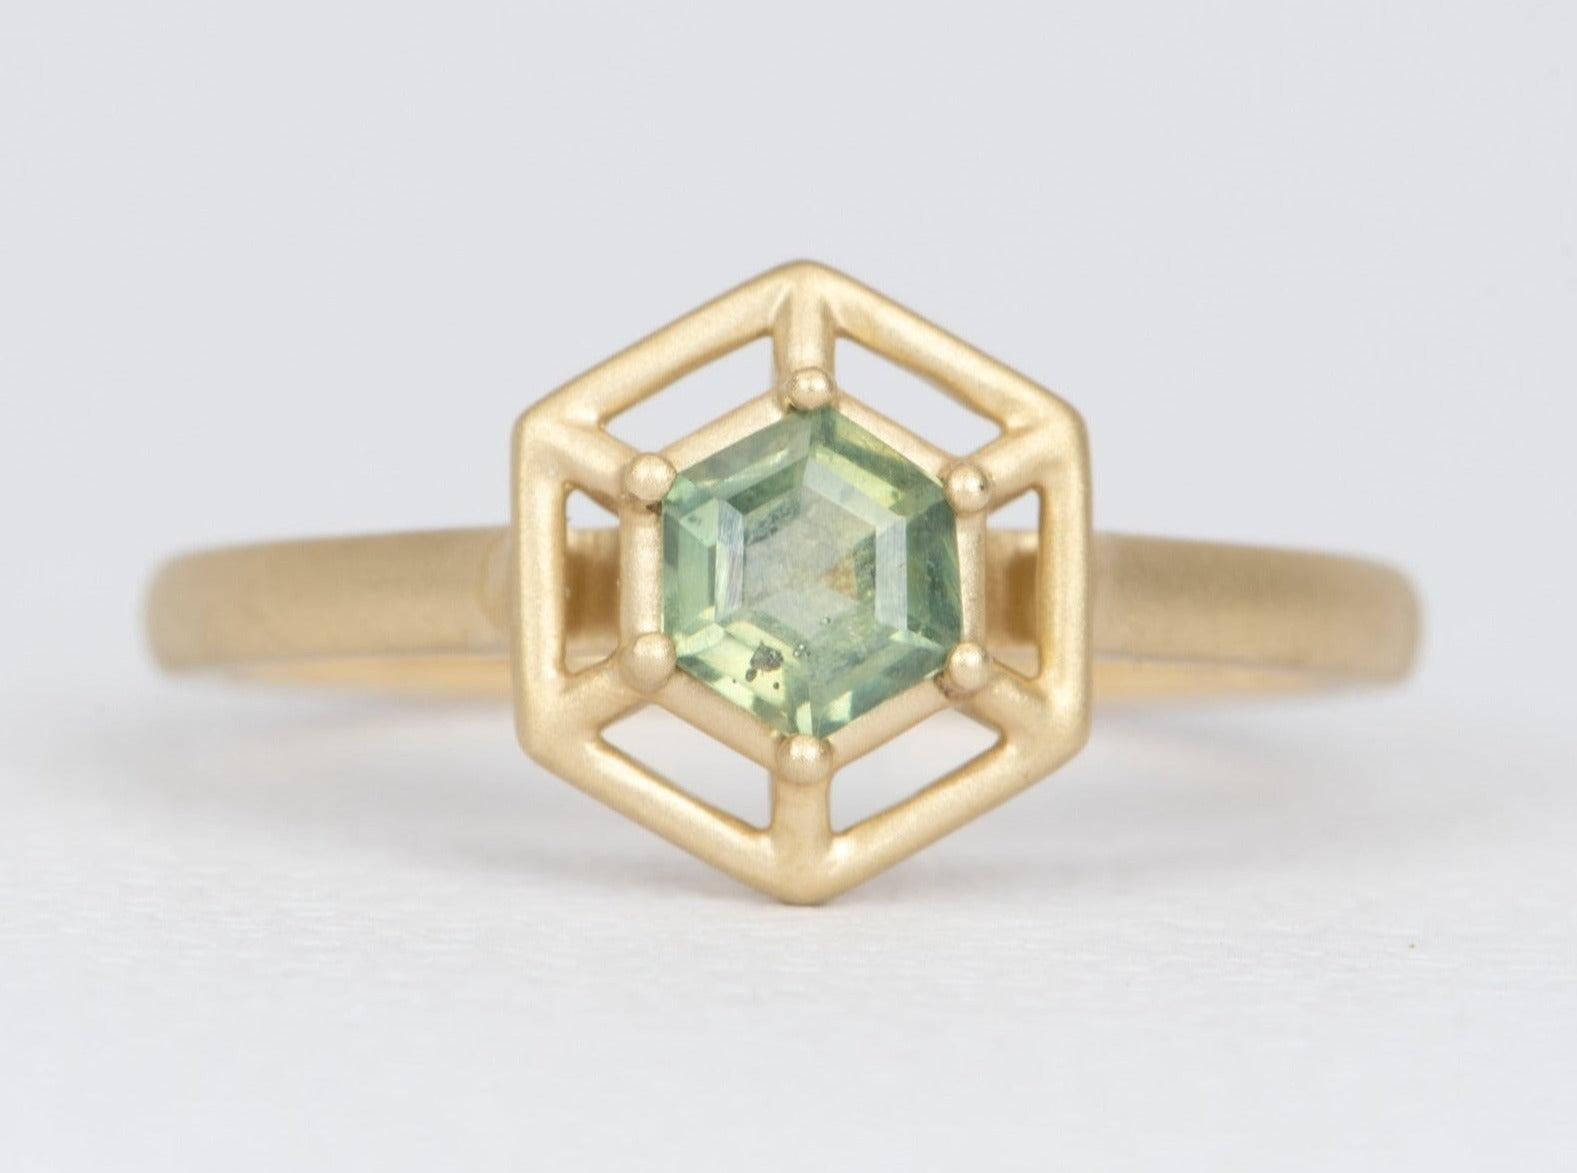 ♥ Solid 14K yellow gold ring set with a hexagon-shaped Montana sapphire in the center with a hexagon facet setting
♥  The ring measures 9.9 mm in length, 9 mm in width, and stands 4.9 mm tall from the finger.

♥ US Size: 7.25 (Free resizi8 mm
♥